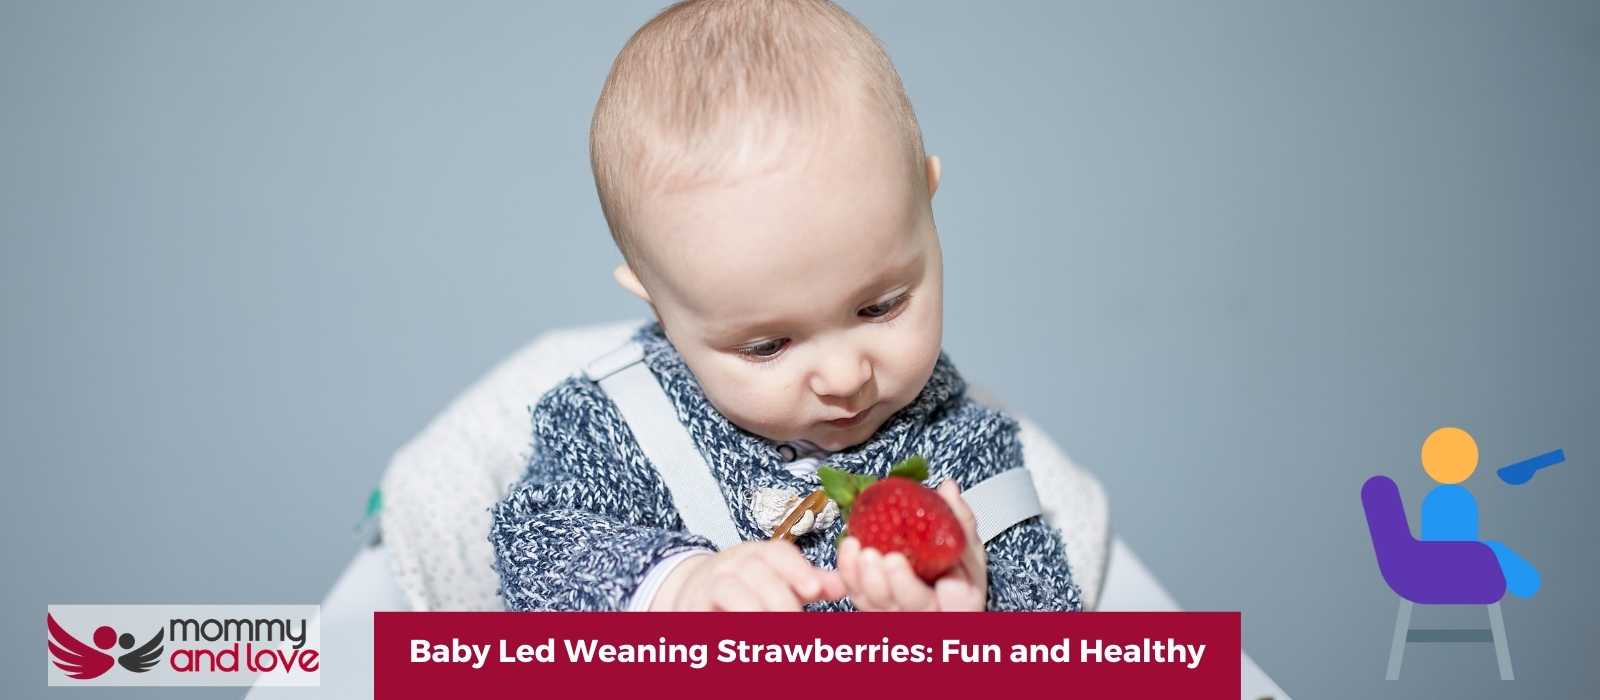 Baby Led Weaning Strawberries Fun and Healthy